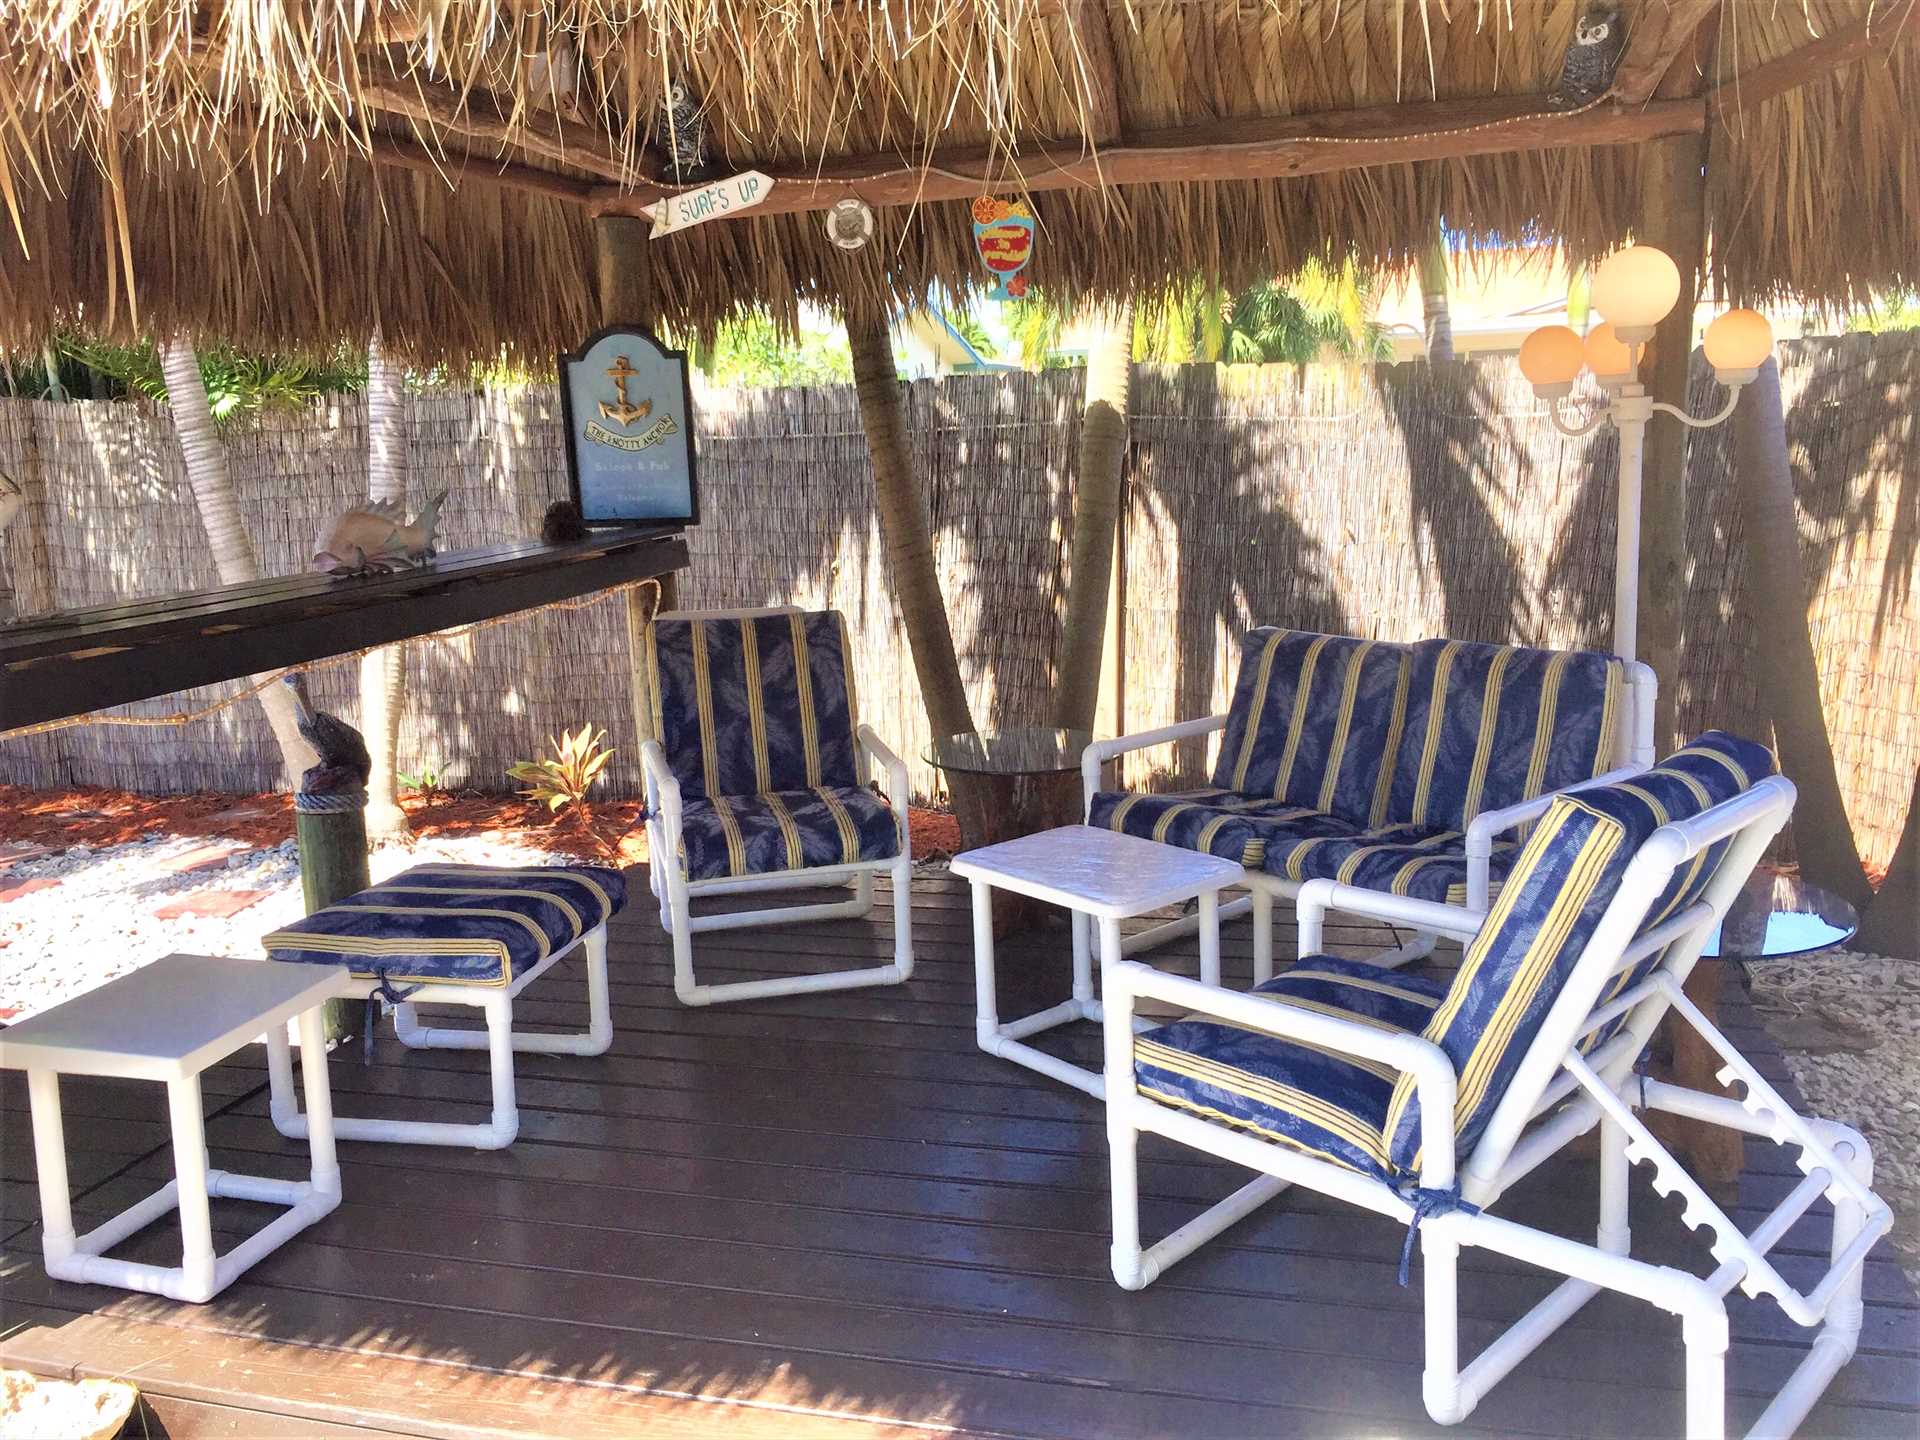 Relax in the Tiki Hut with your favorite adult beverage - It